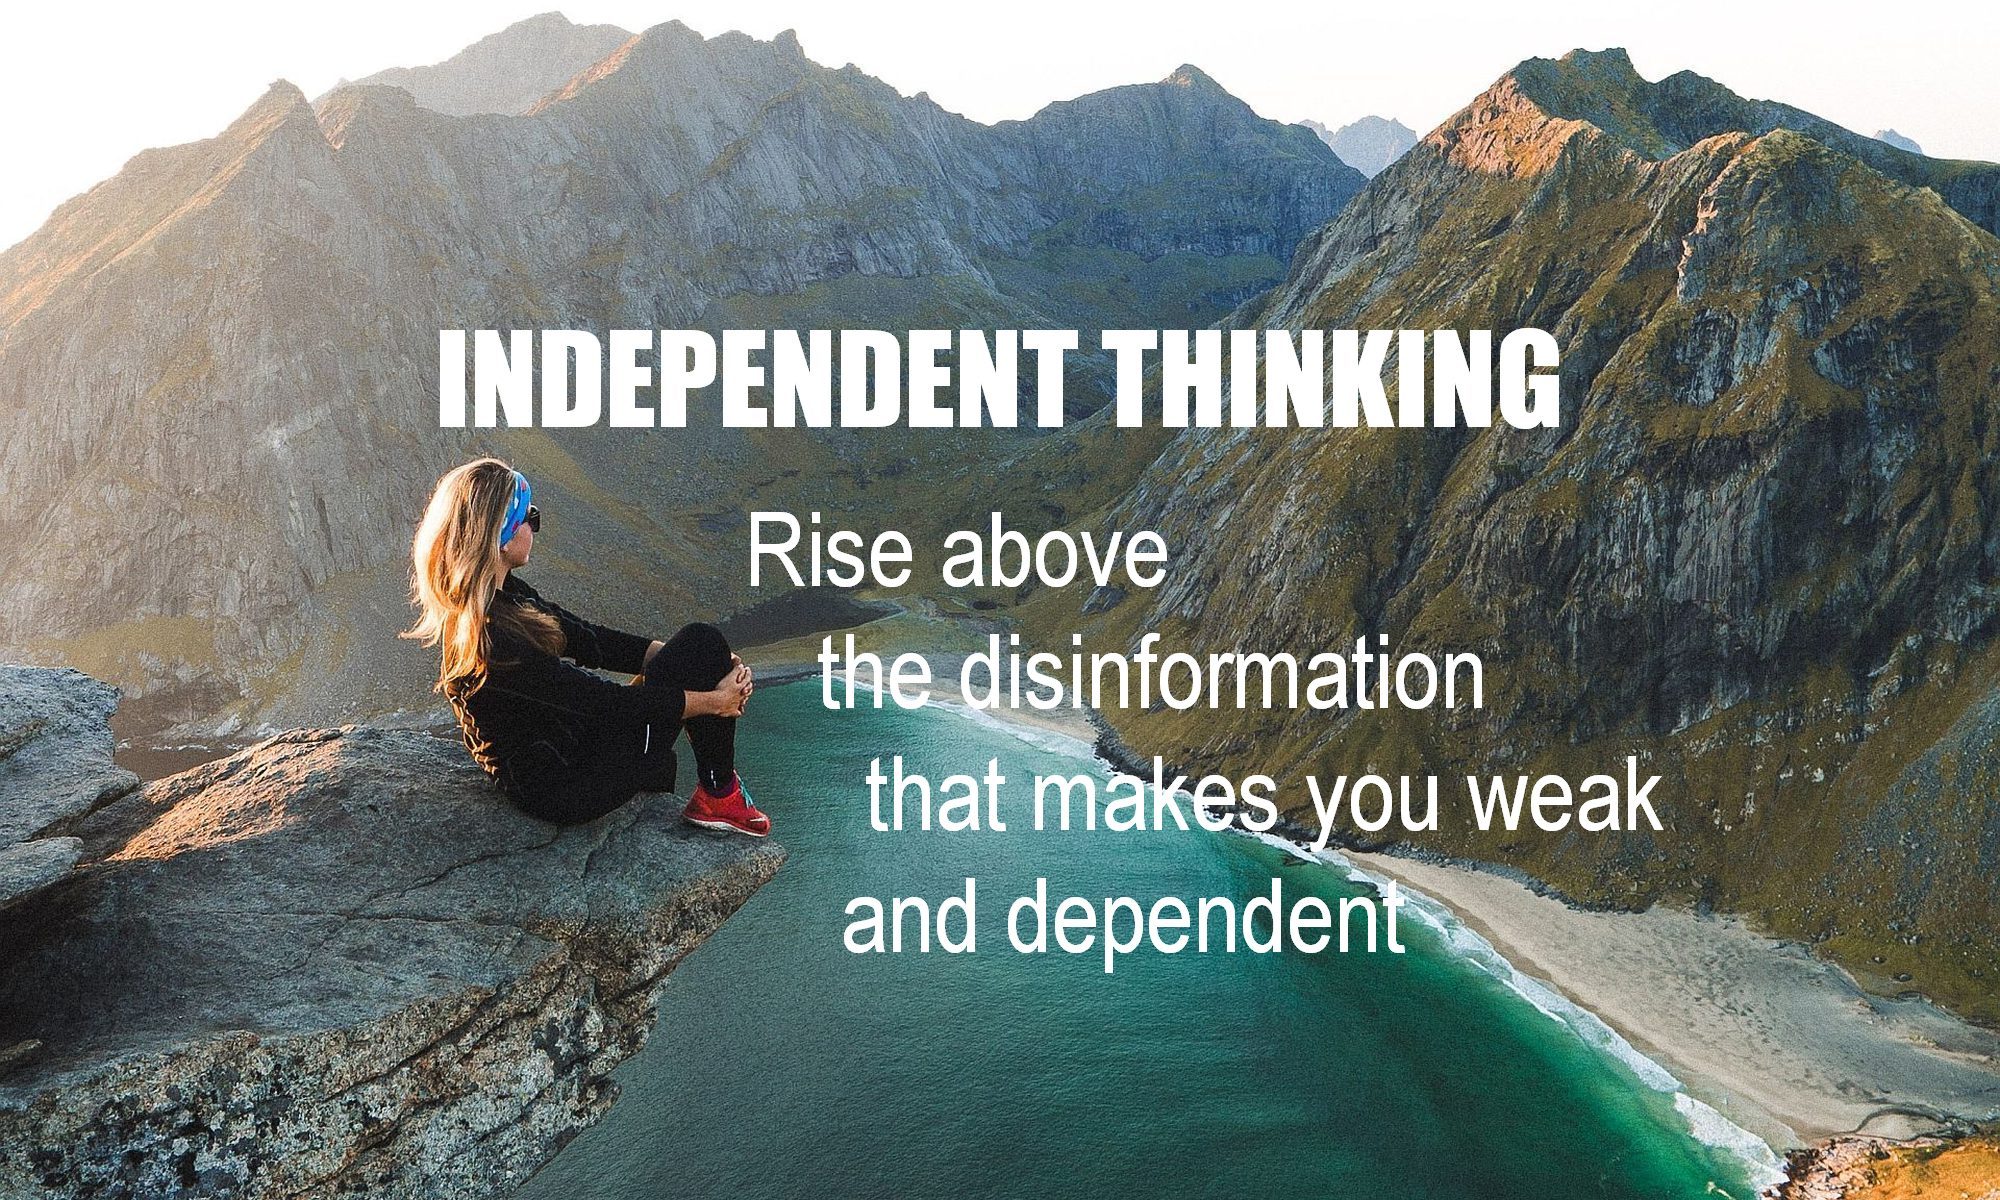 independent-thinking-skill-ability-what-is-it-how-to-develop-think-for-ones-self